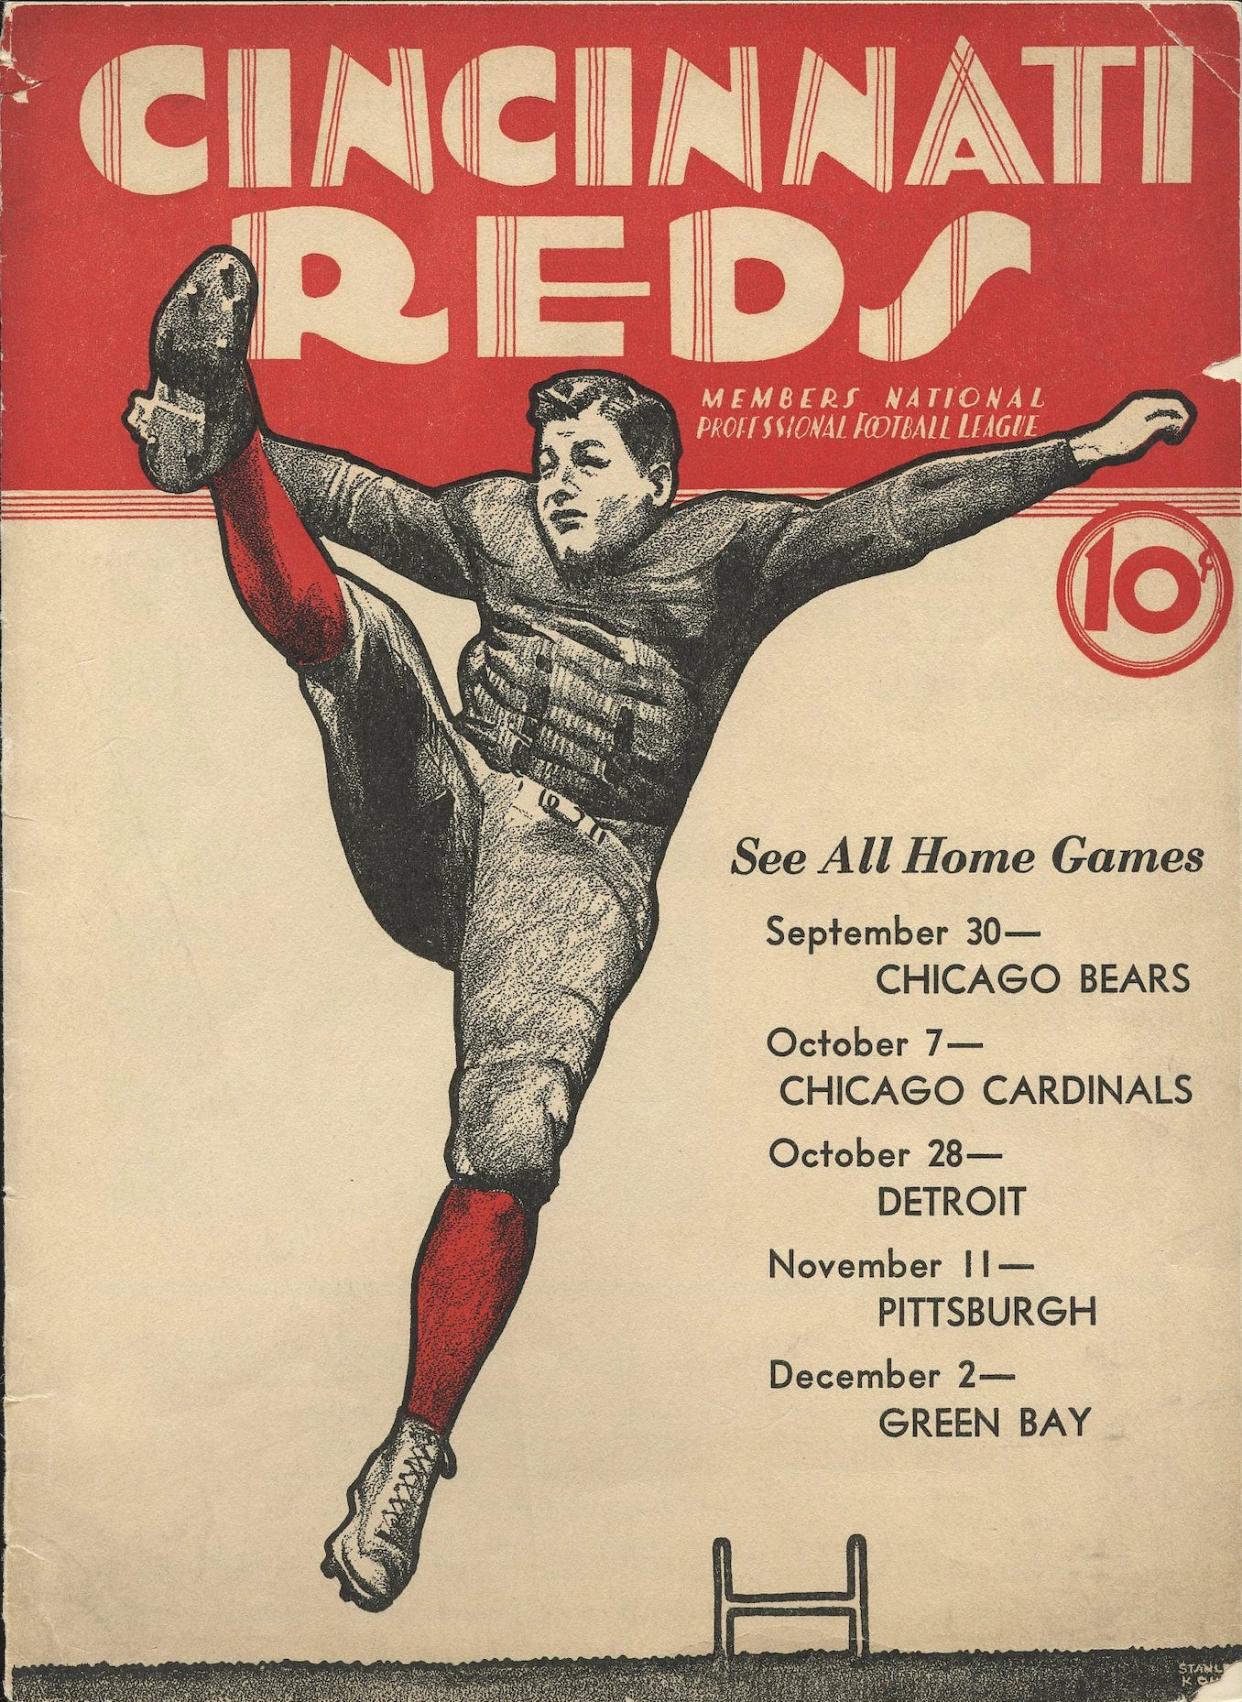 Program from the 1934 Cincinnati Reds, an early NFL football team and one of the least successful.